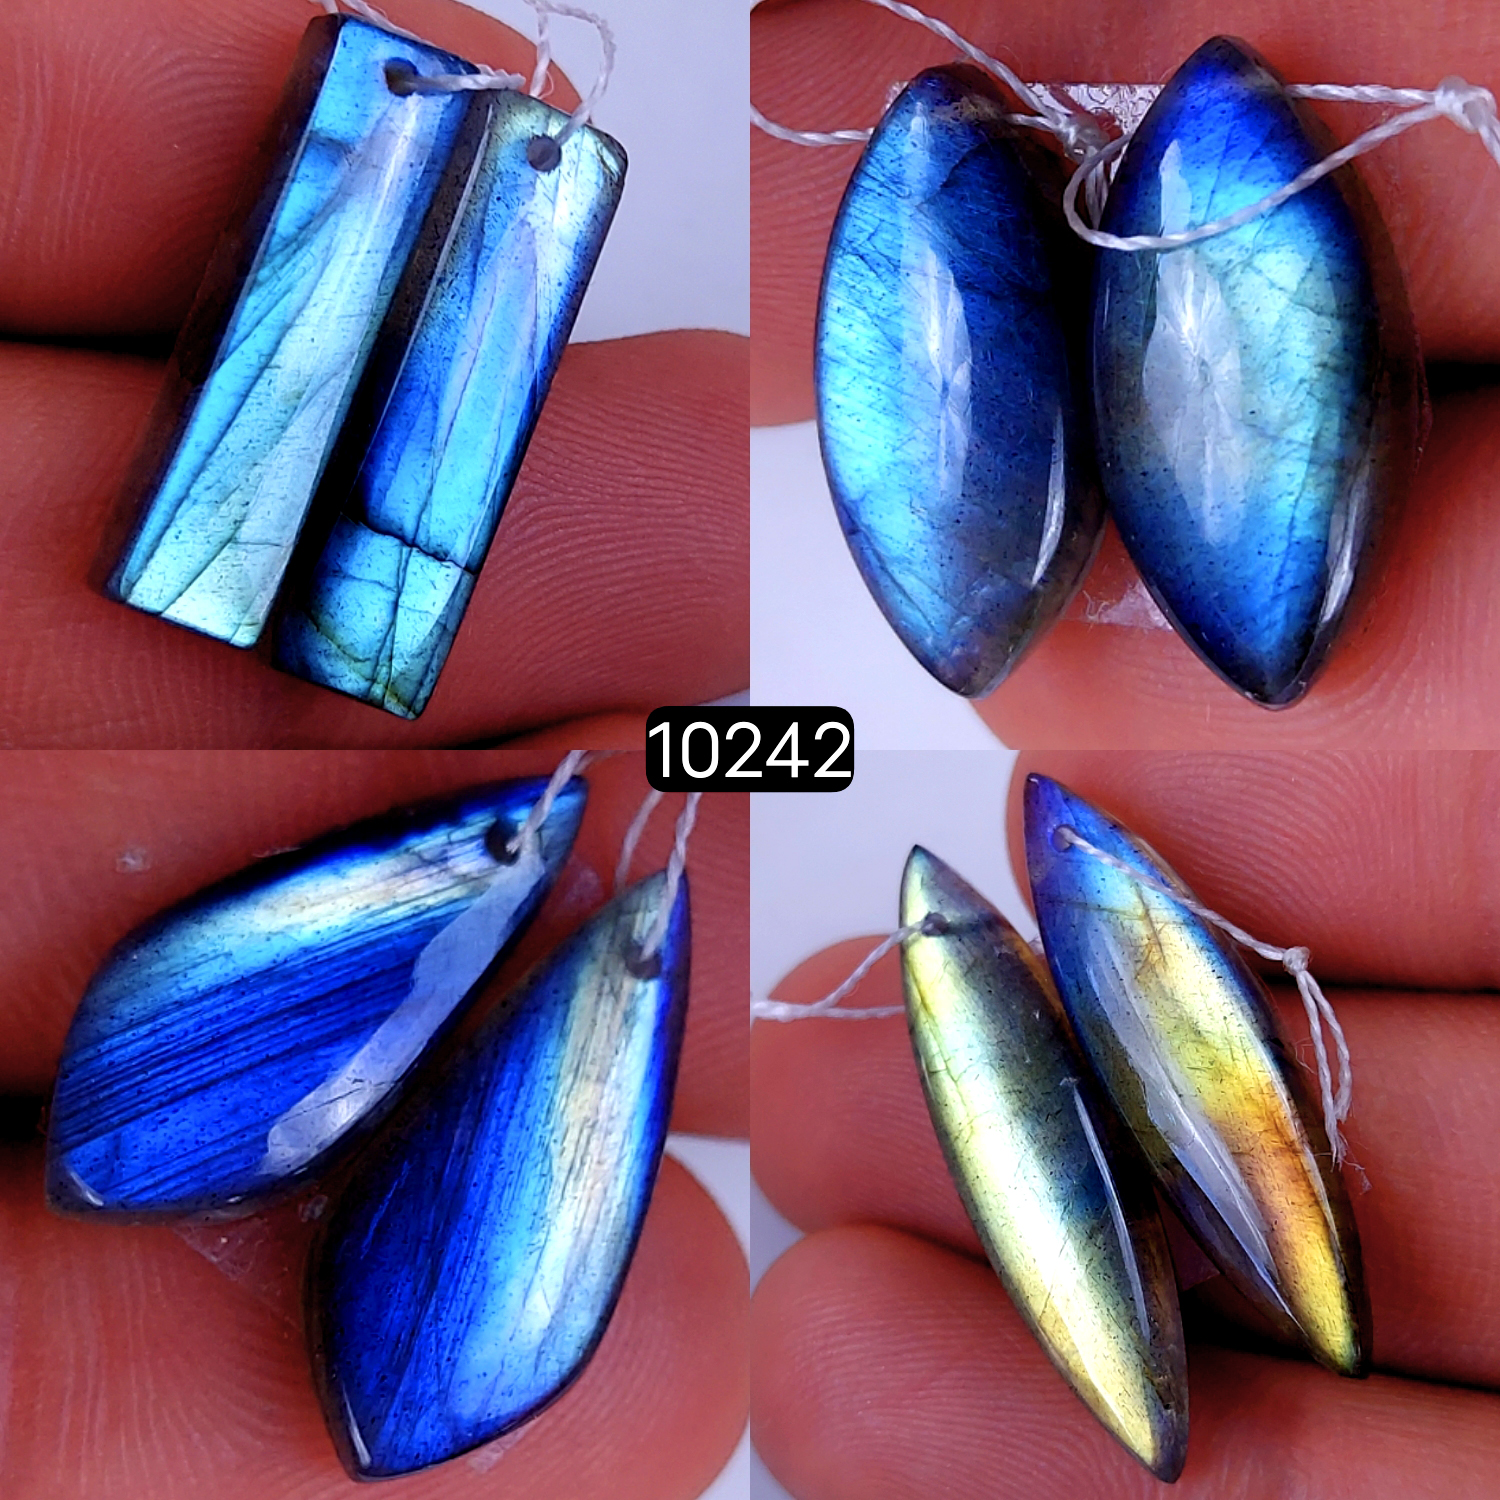 4Pair 65Cts Natural Labradorite Crystal Drill Dangle Drop Earring Pairs Silver Earrings Blue Labradorite Hoop Jewelry  30x7 22x10mm #10242